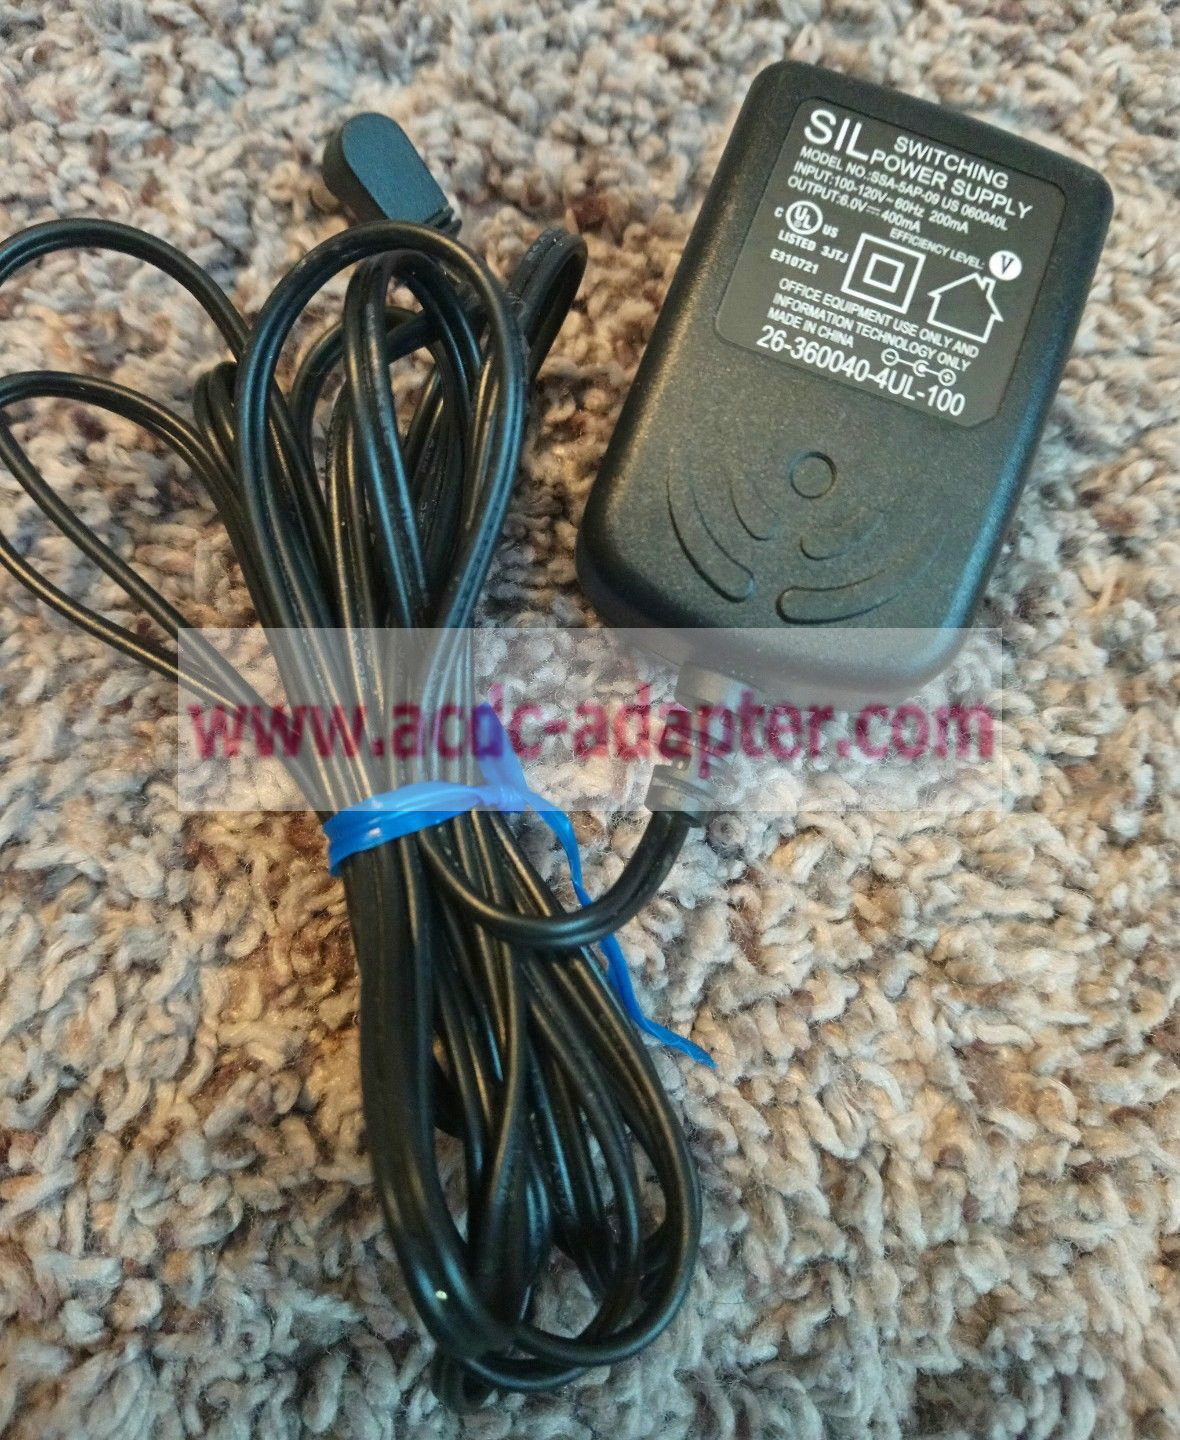 SIL SSA-5AP-09 US 060040L AC Power Adapter for Vtech Cordless Phone System 26-3600